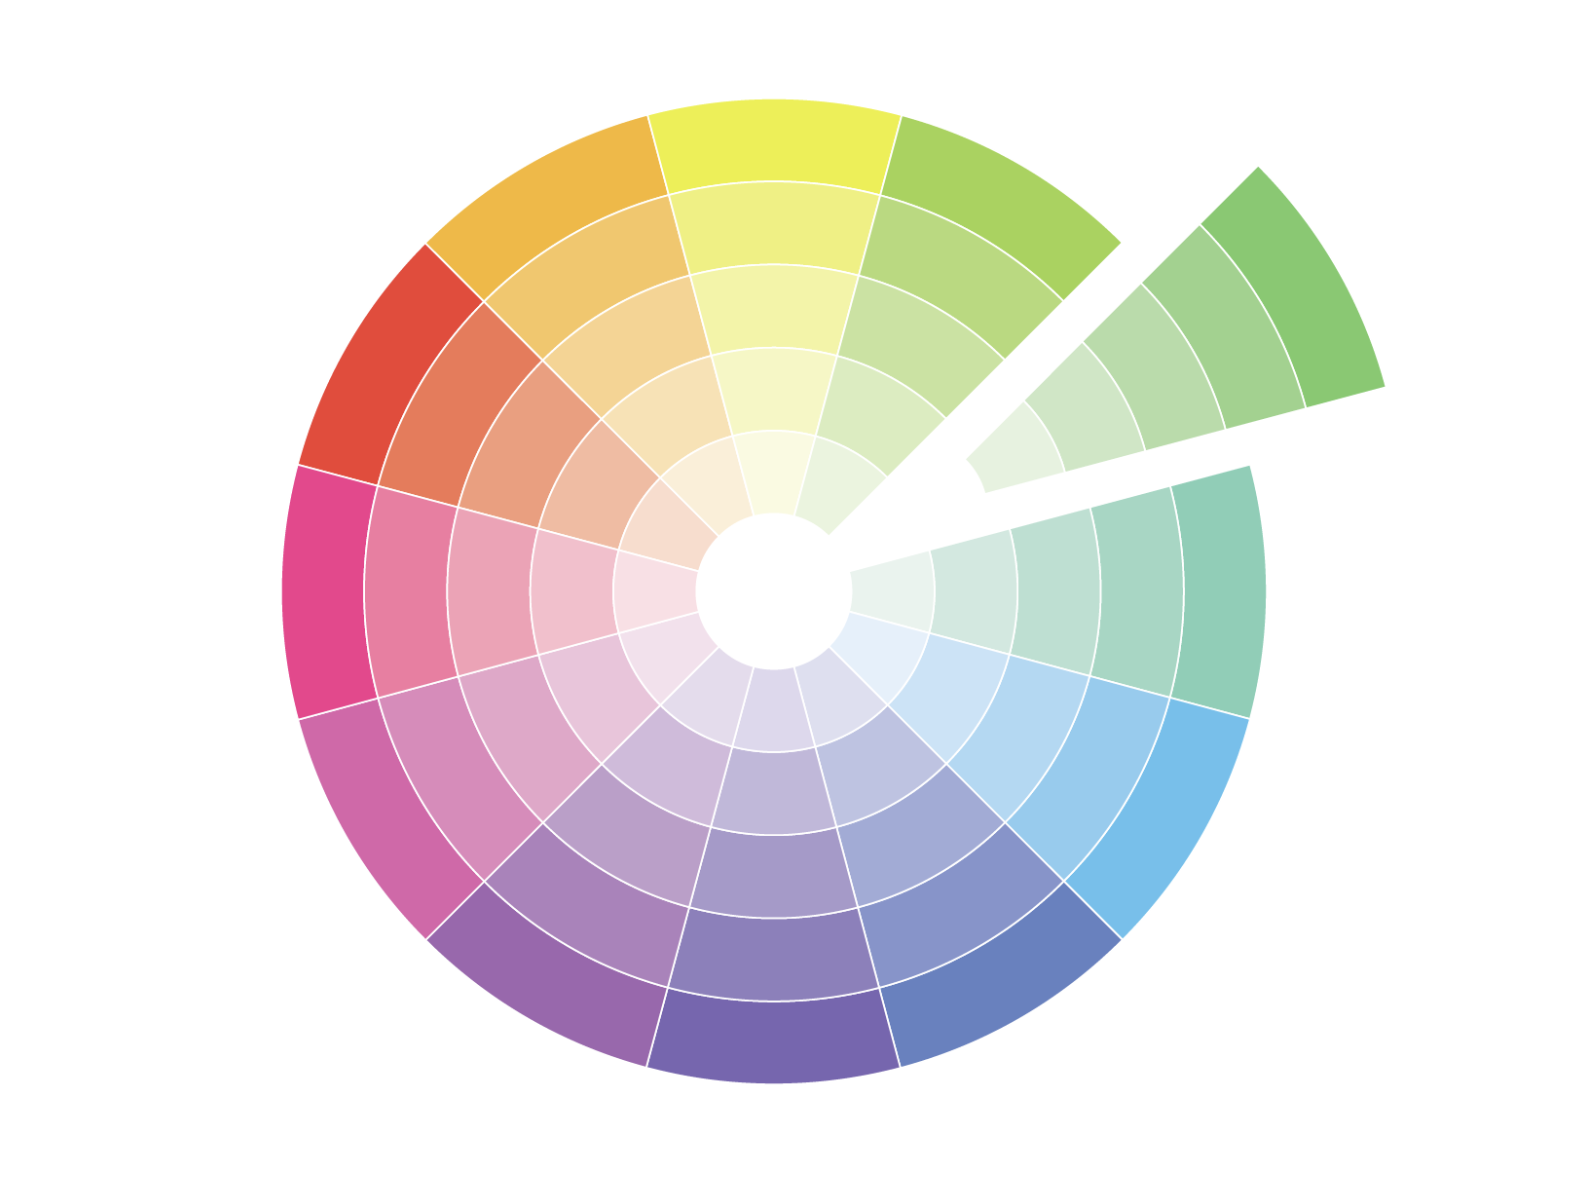 Color wheel is a diagram representing the arrangement of colors with their chromatic relationships.